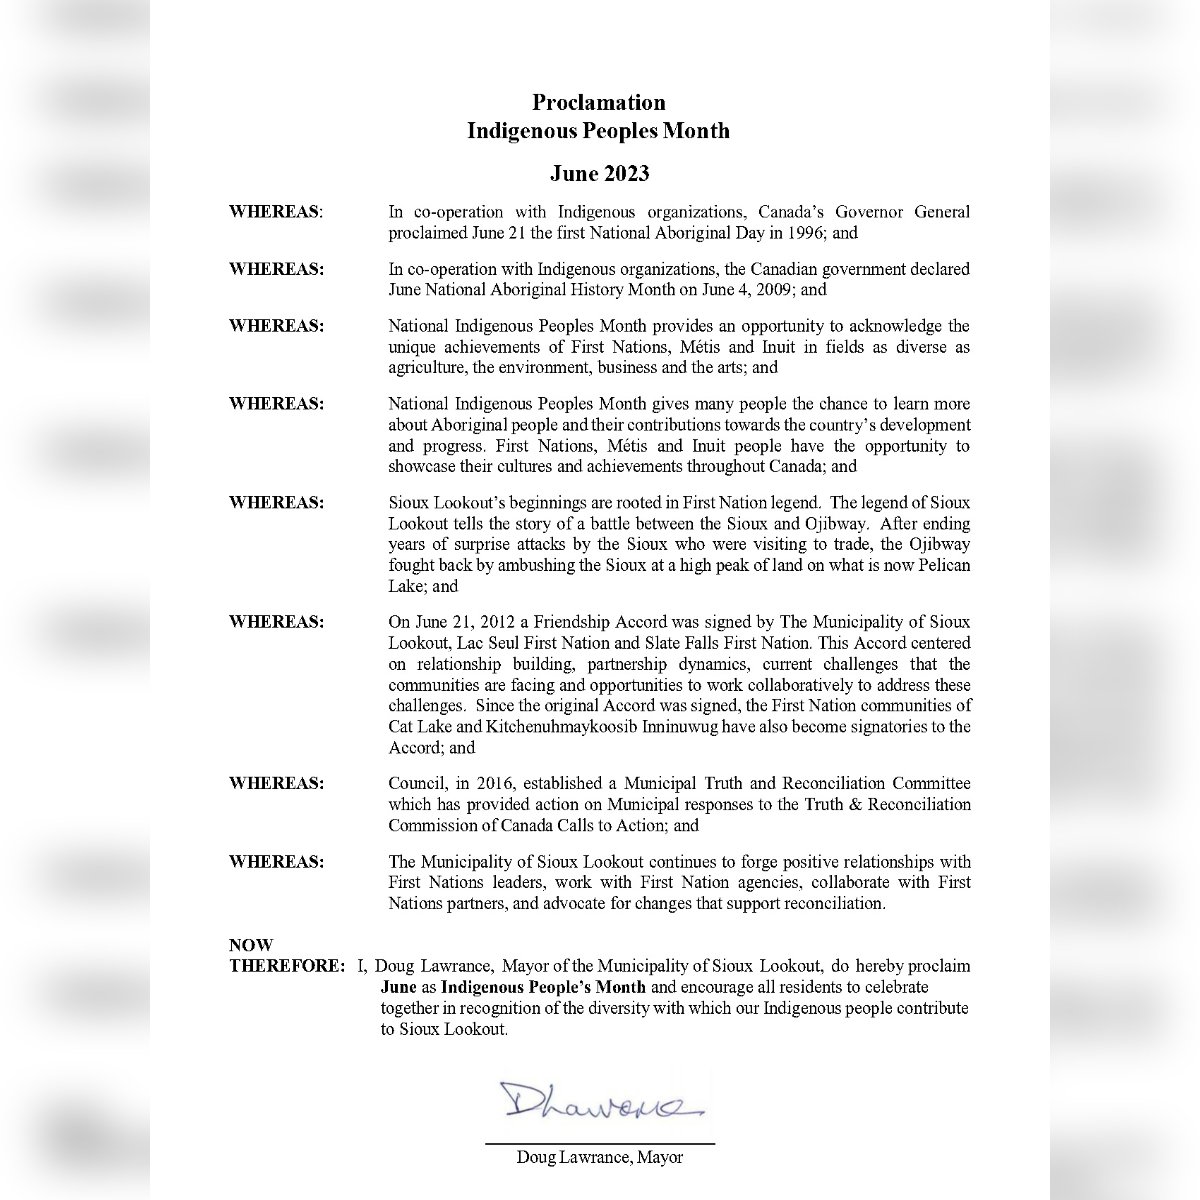 Proclamation for Indigenous People's Month